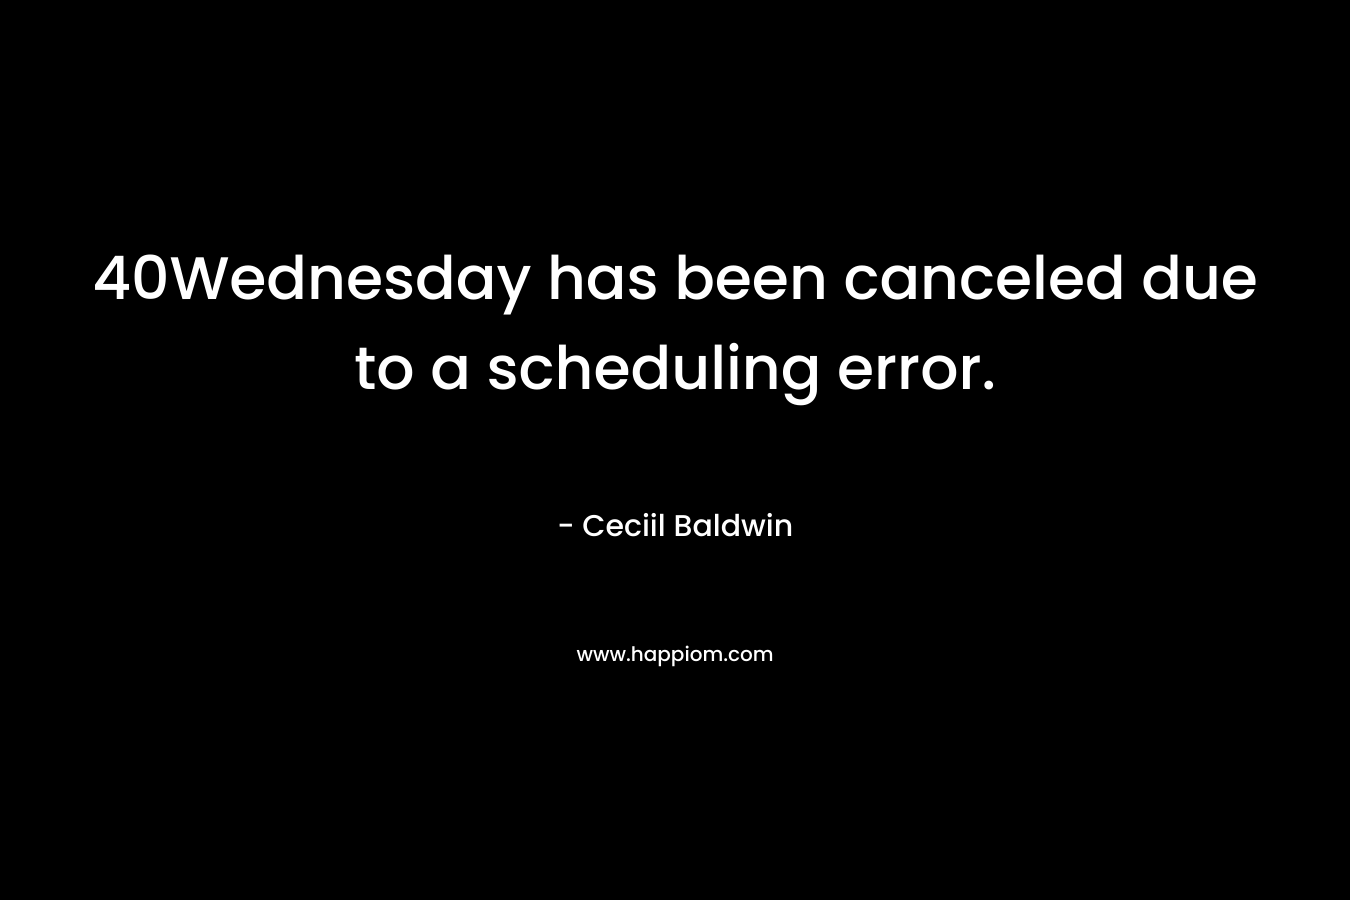 40Wednesday has been canceled due to a scheduling error. – Ceciil Baldwin